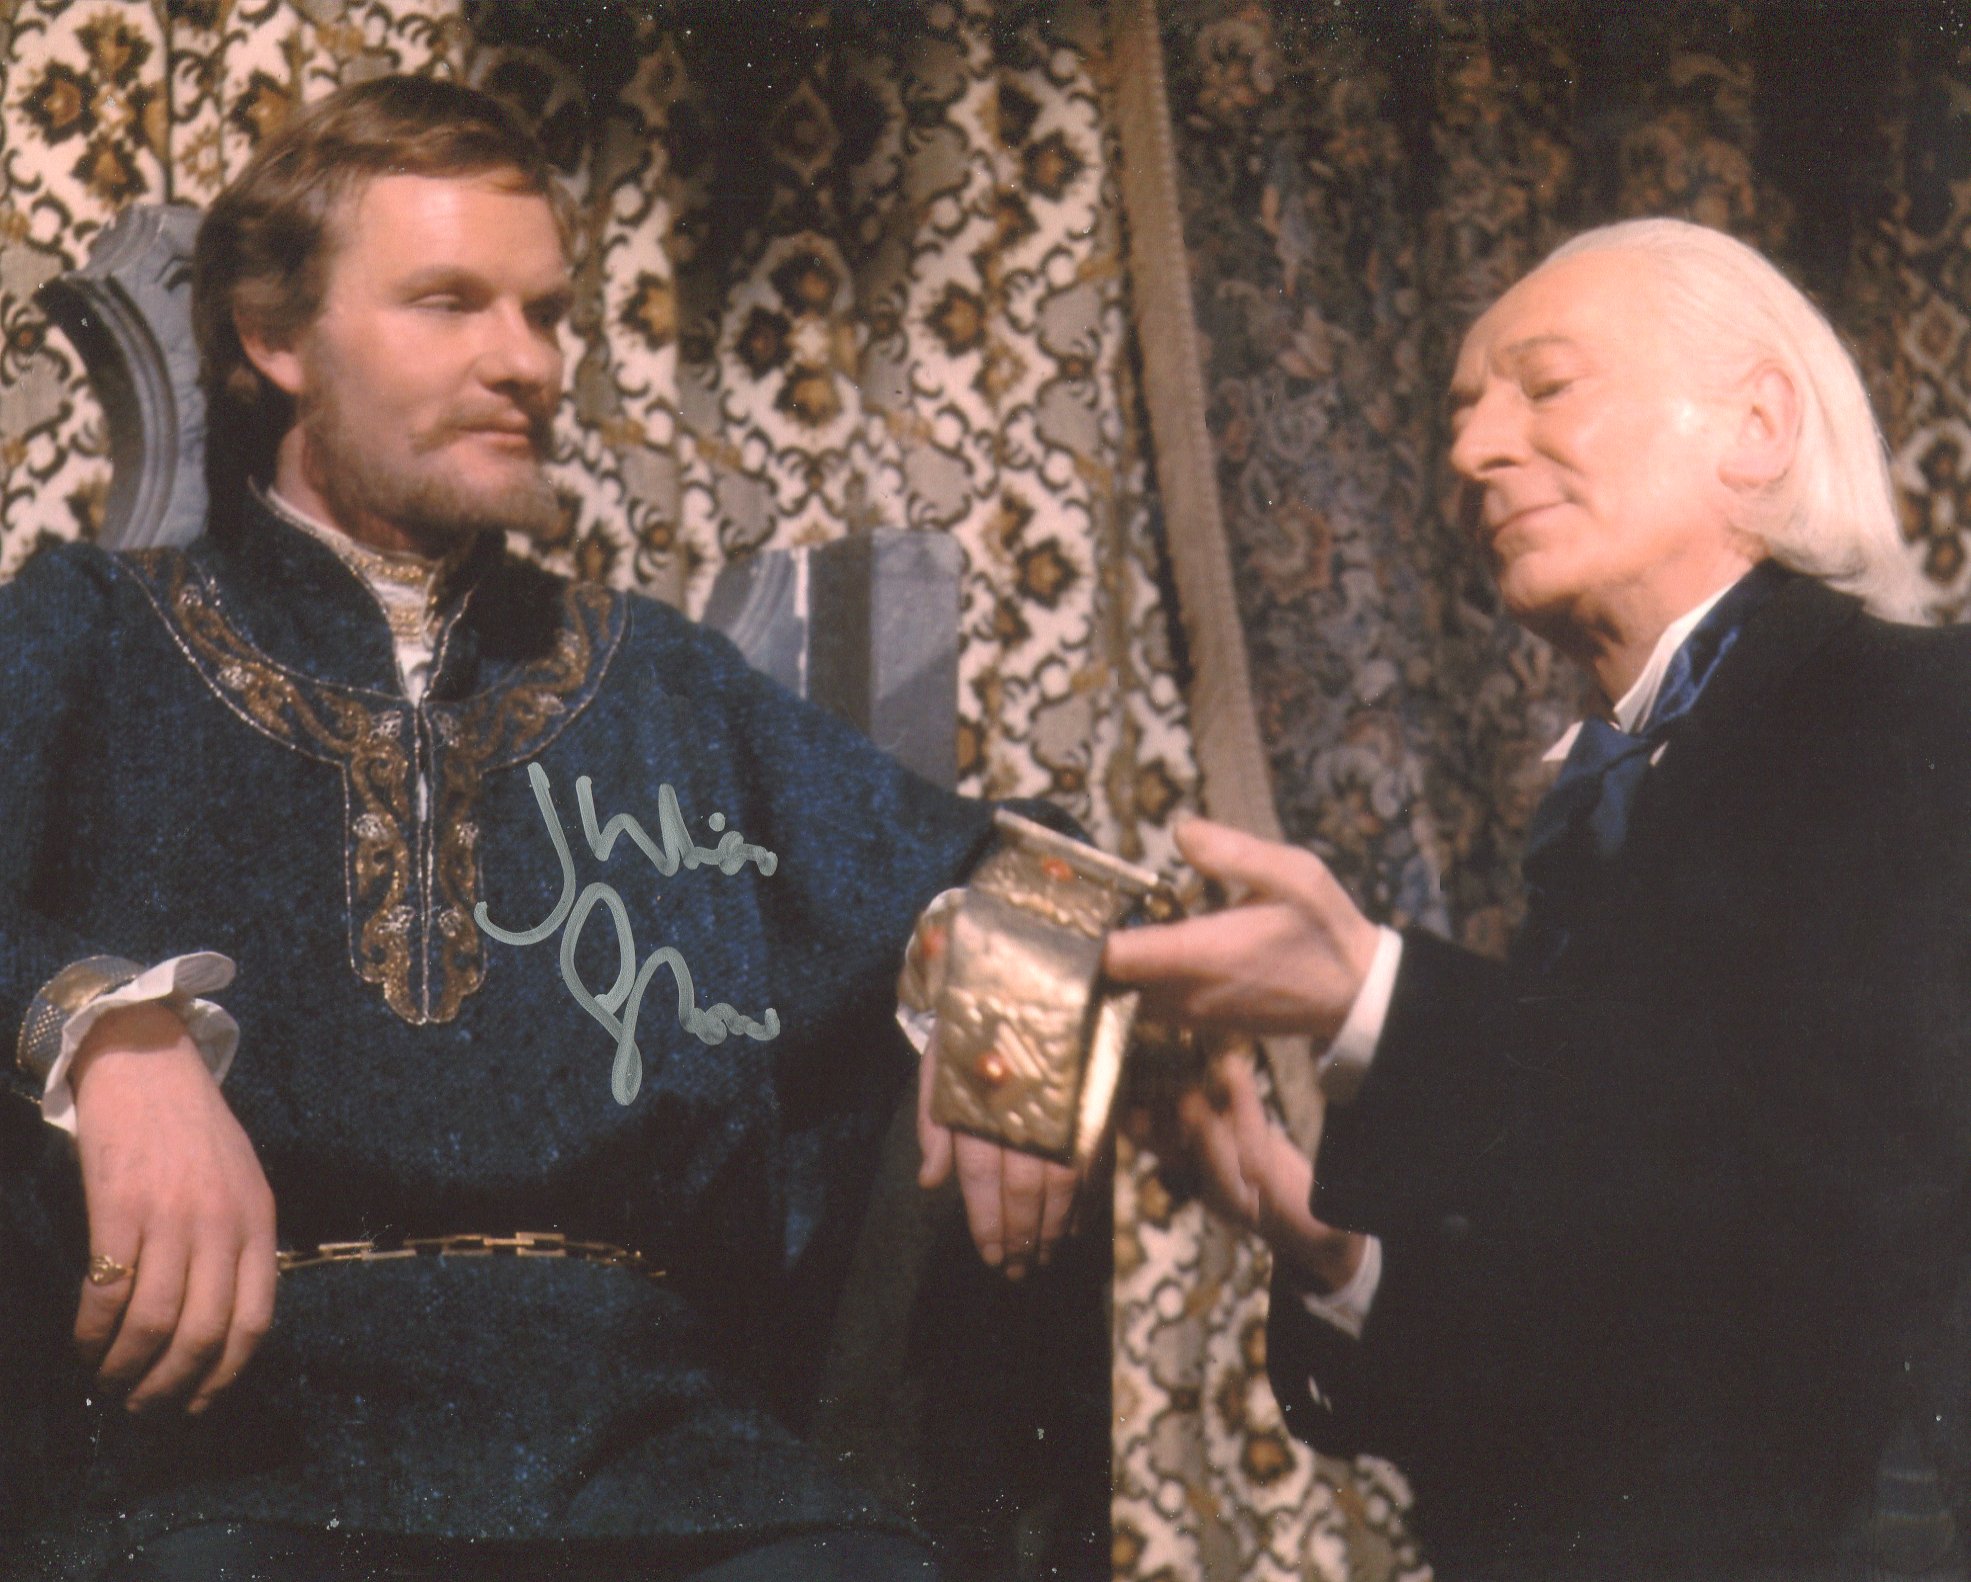 Doctor Who 8x10 inch photo scene signed by K9 actor Julian Glover. Good condition. All autographs